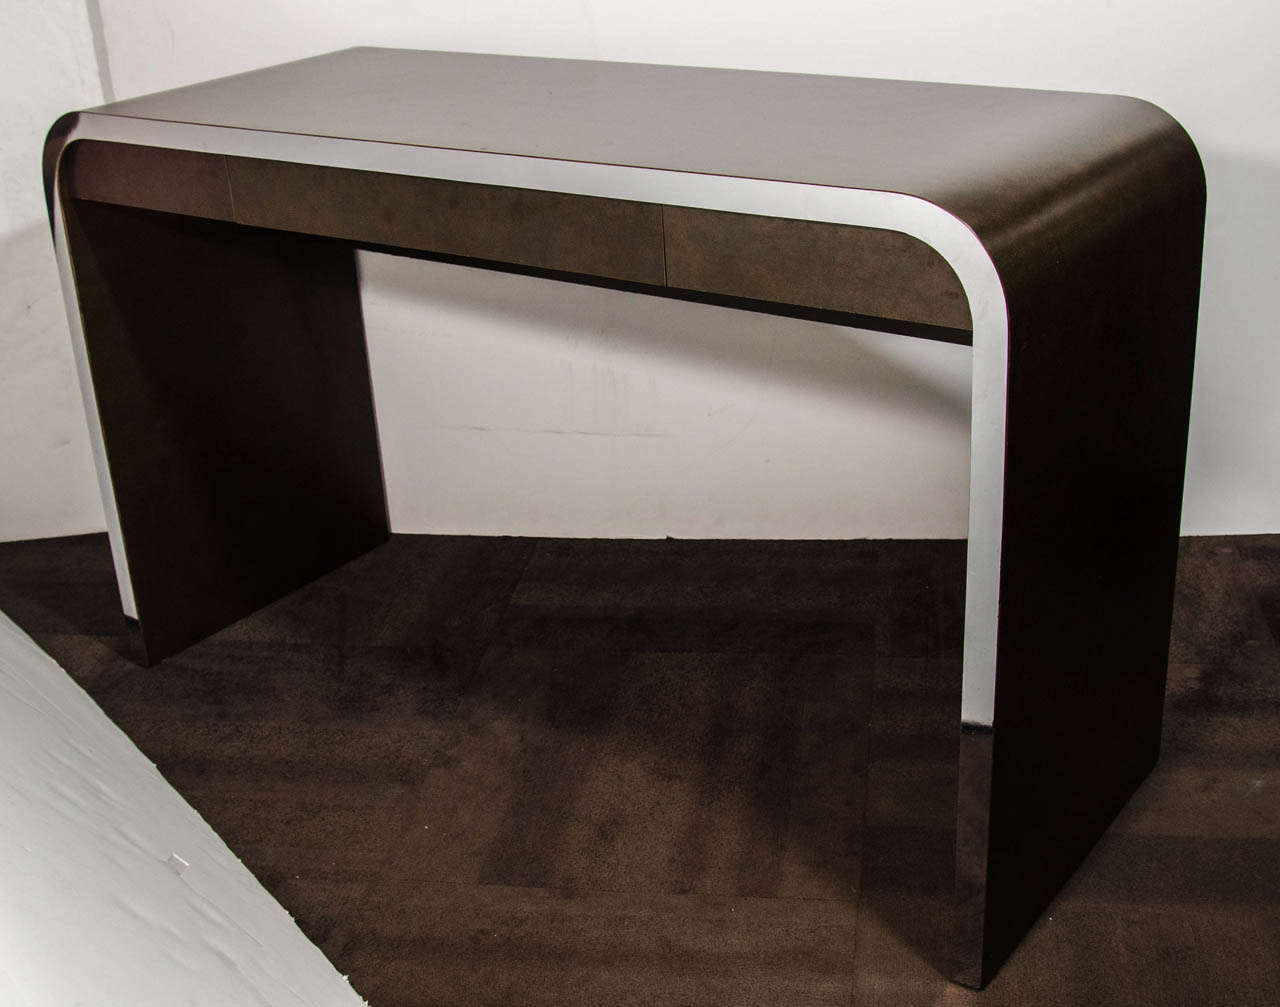 Modernist writing table and console table in dark burled wood laminate with stylized chrome banded details. The table has a waterfall design with streamline curved edges, and is conveniently fitted with a narrow center drawer. The console is